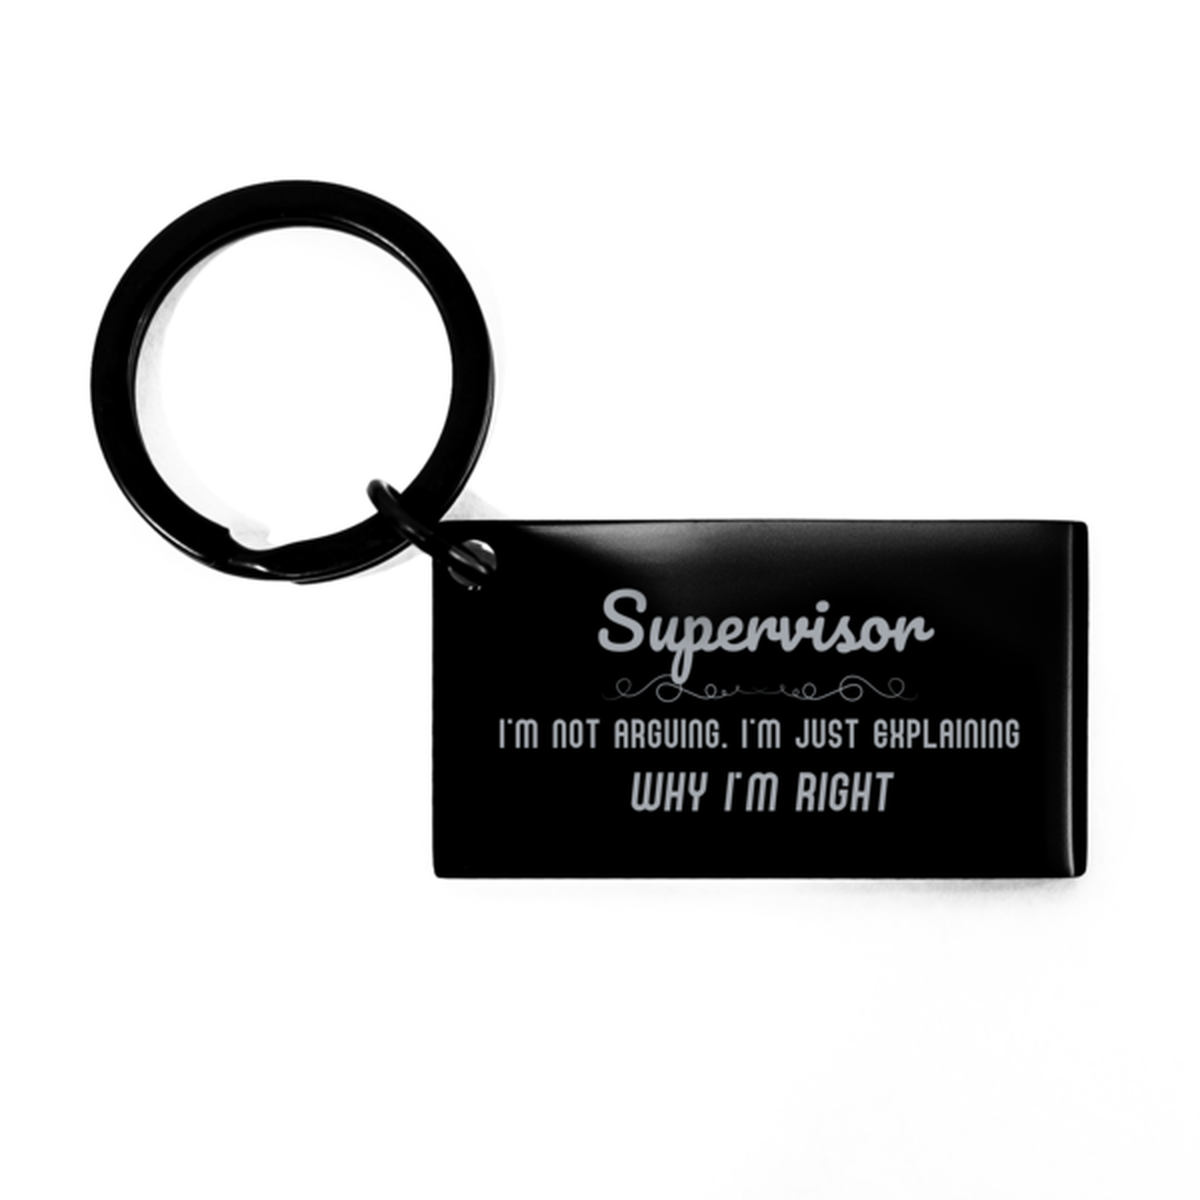 Supervisor I'm not Arguing. I'm Just Explaining Why I'm RIGHT Keychain, Funny Saying Quote Supervisor Gifts For Supervisor Graduation Birthday Christmas Gifts for Men Women Coworker